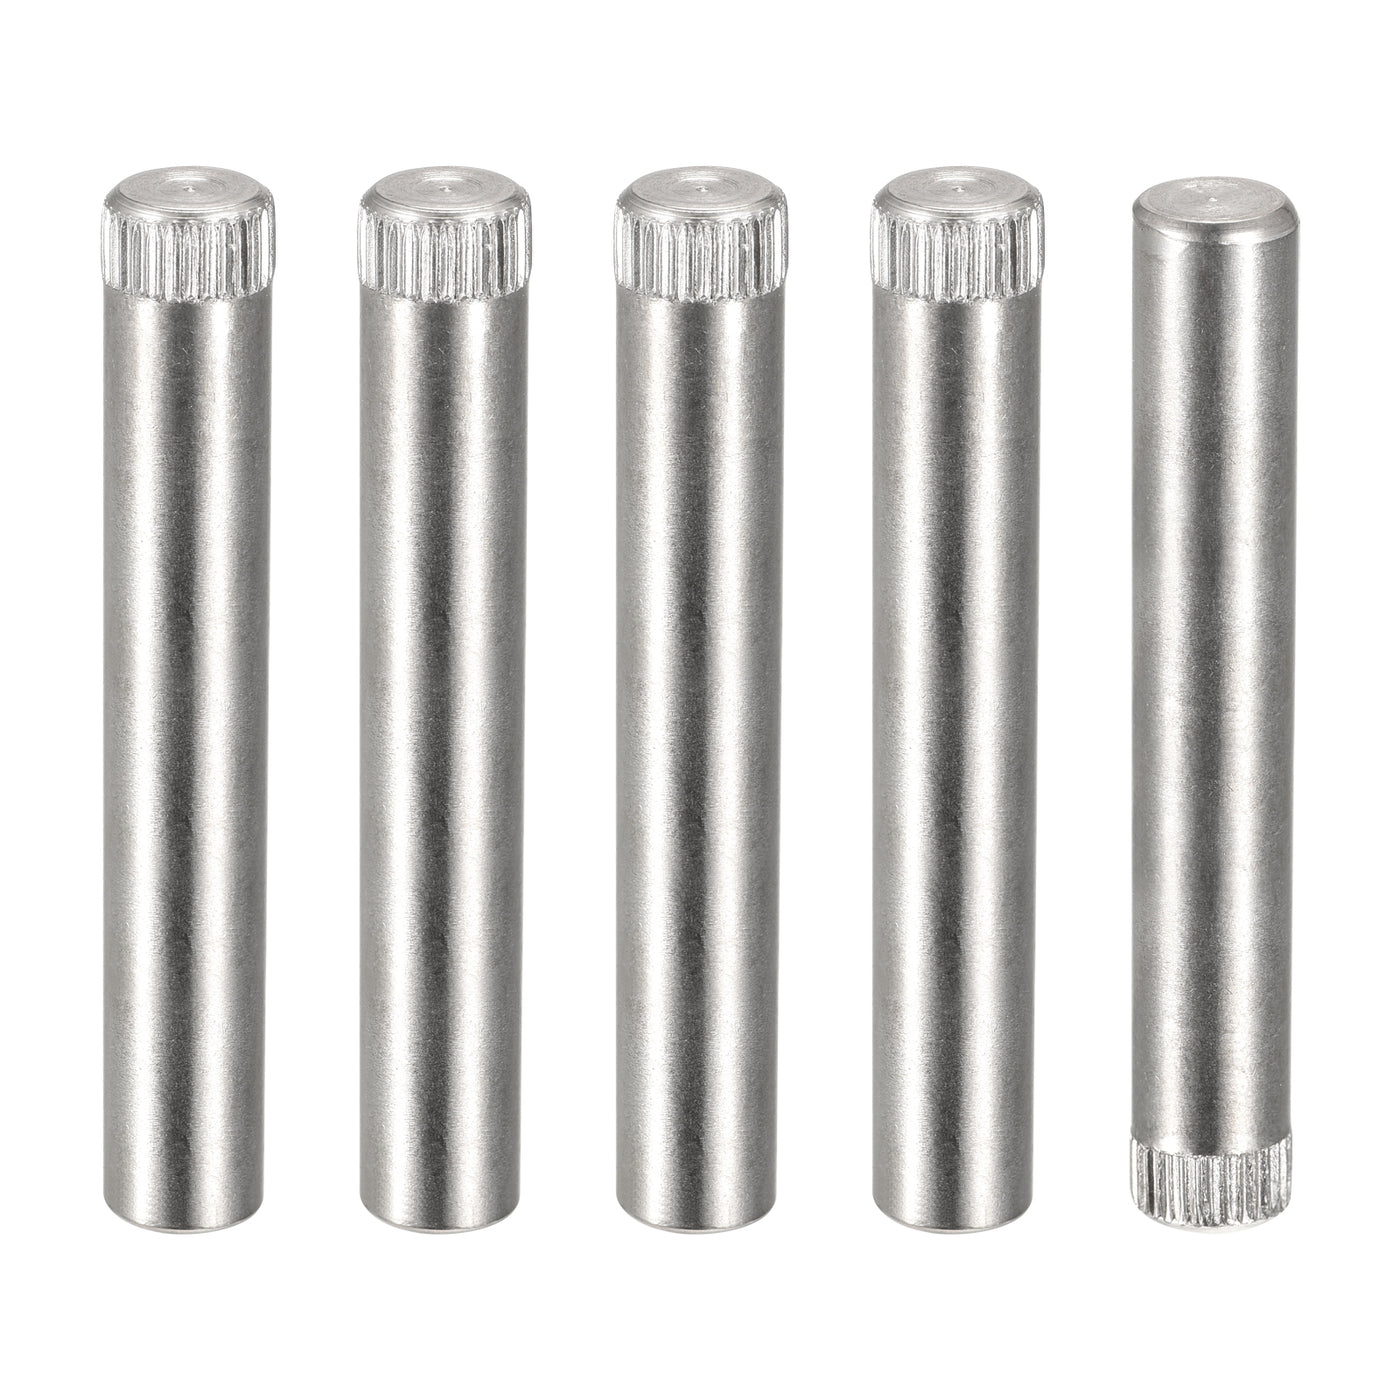 uxcell Uxcell 8x50mm 304 Stainless Steel Dowel Pins, 5Pcs Knurled Head Flat End Dowel Pin